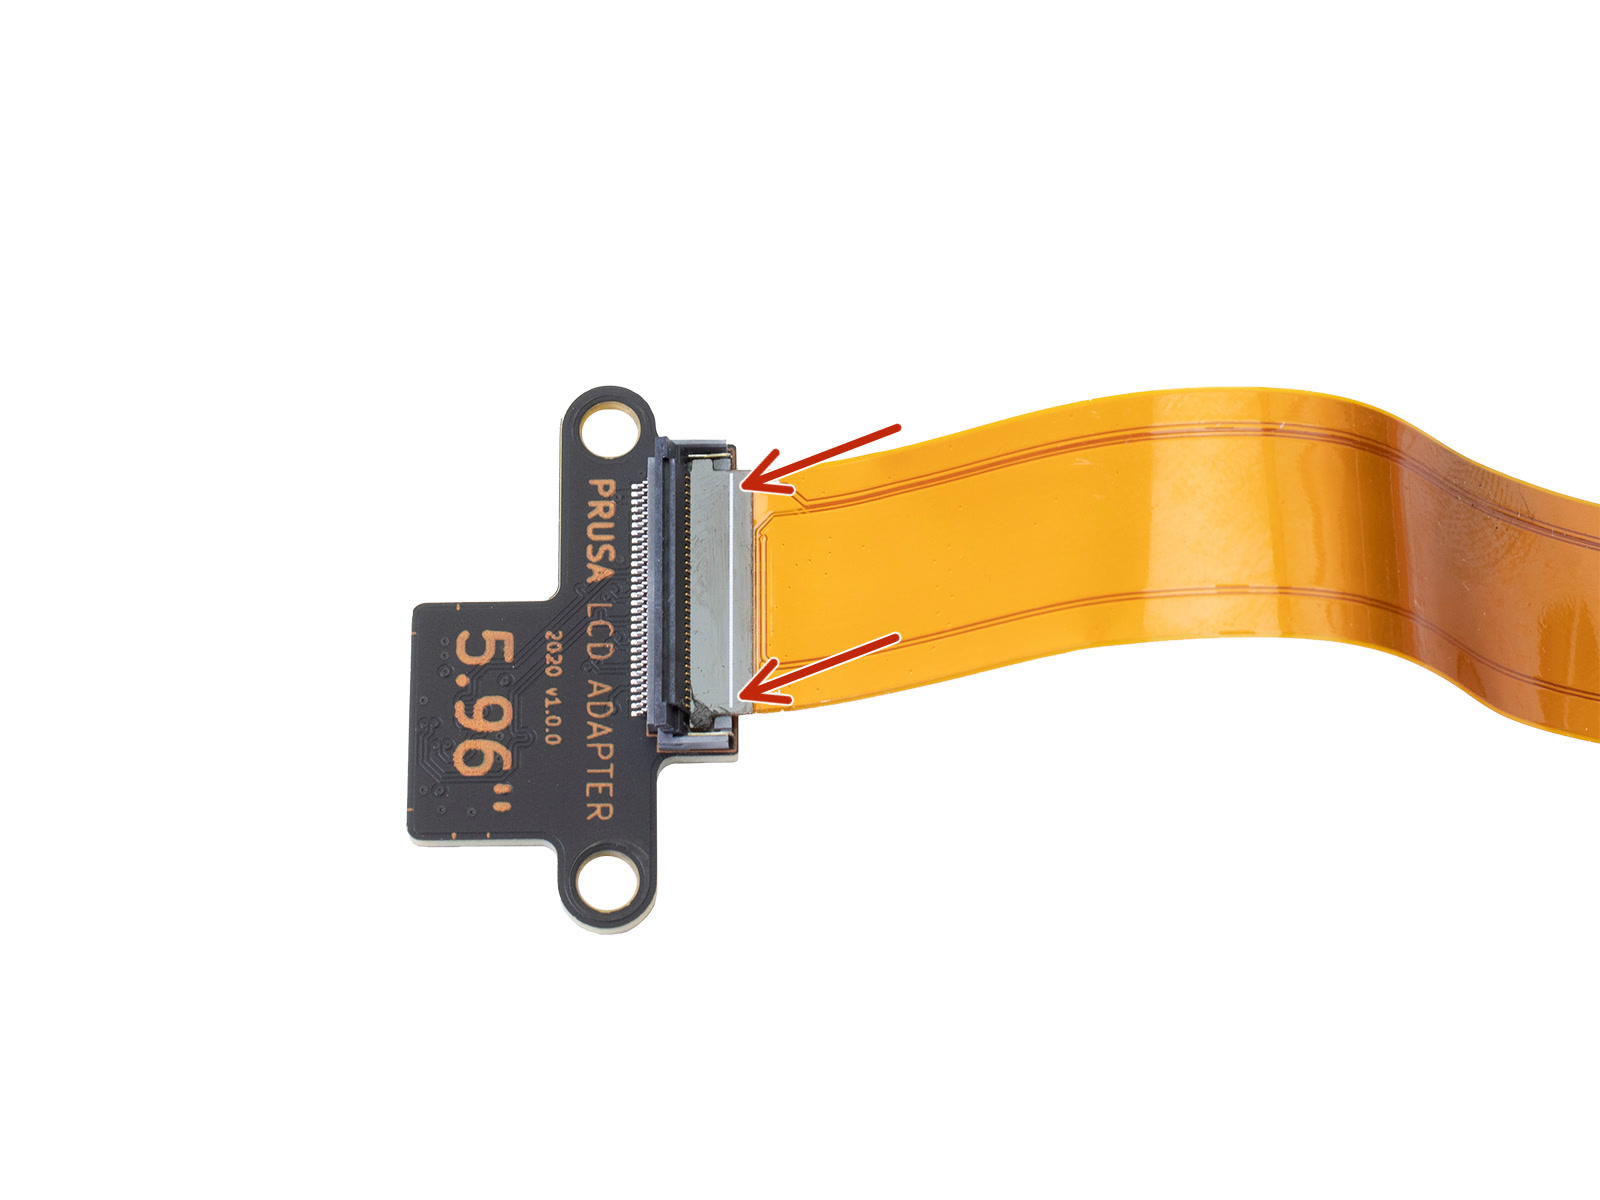 Mounting the Prusa LCD adapter